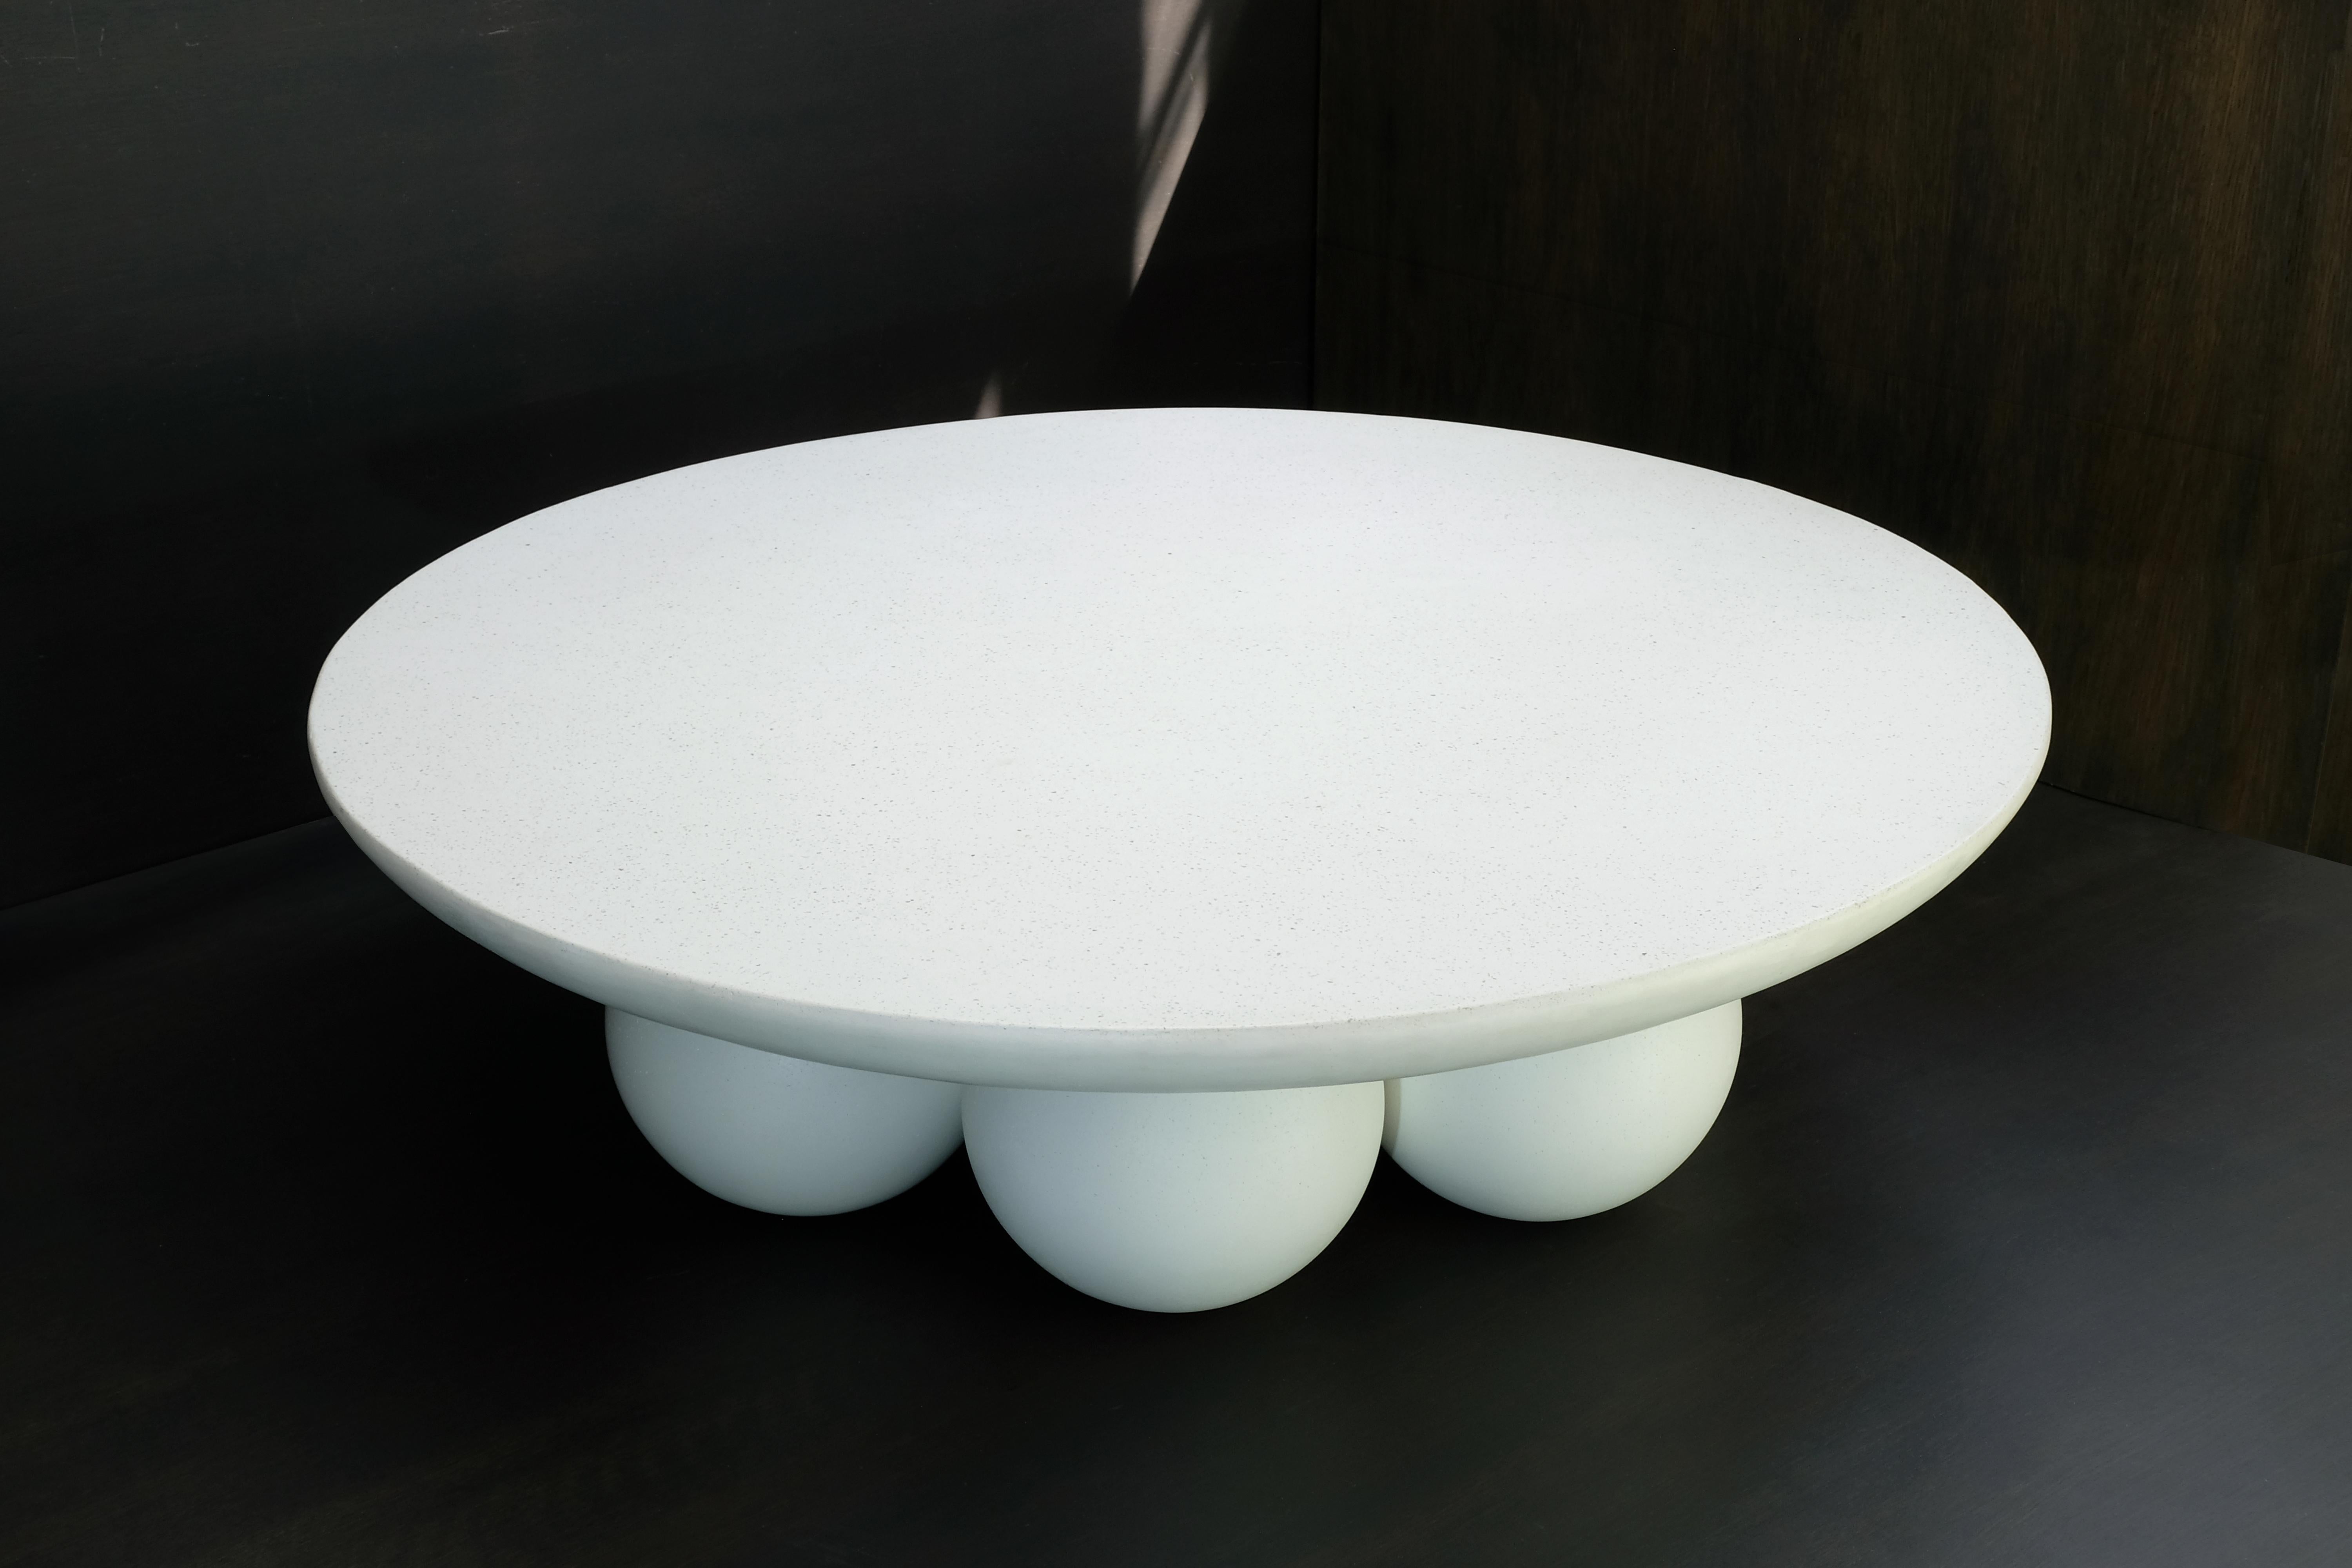 PIEDI COFFEE TABLE is part of our mono-material object collection. The effortless pairing of the monolithic body with the articulate feet gives this piece its playful beauty. 

Design: Alentes Atelier 
Material: Cast Stone
Made by hand in Greece,